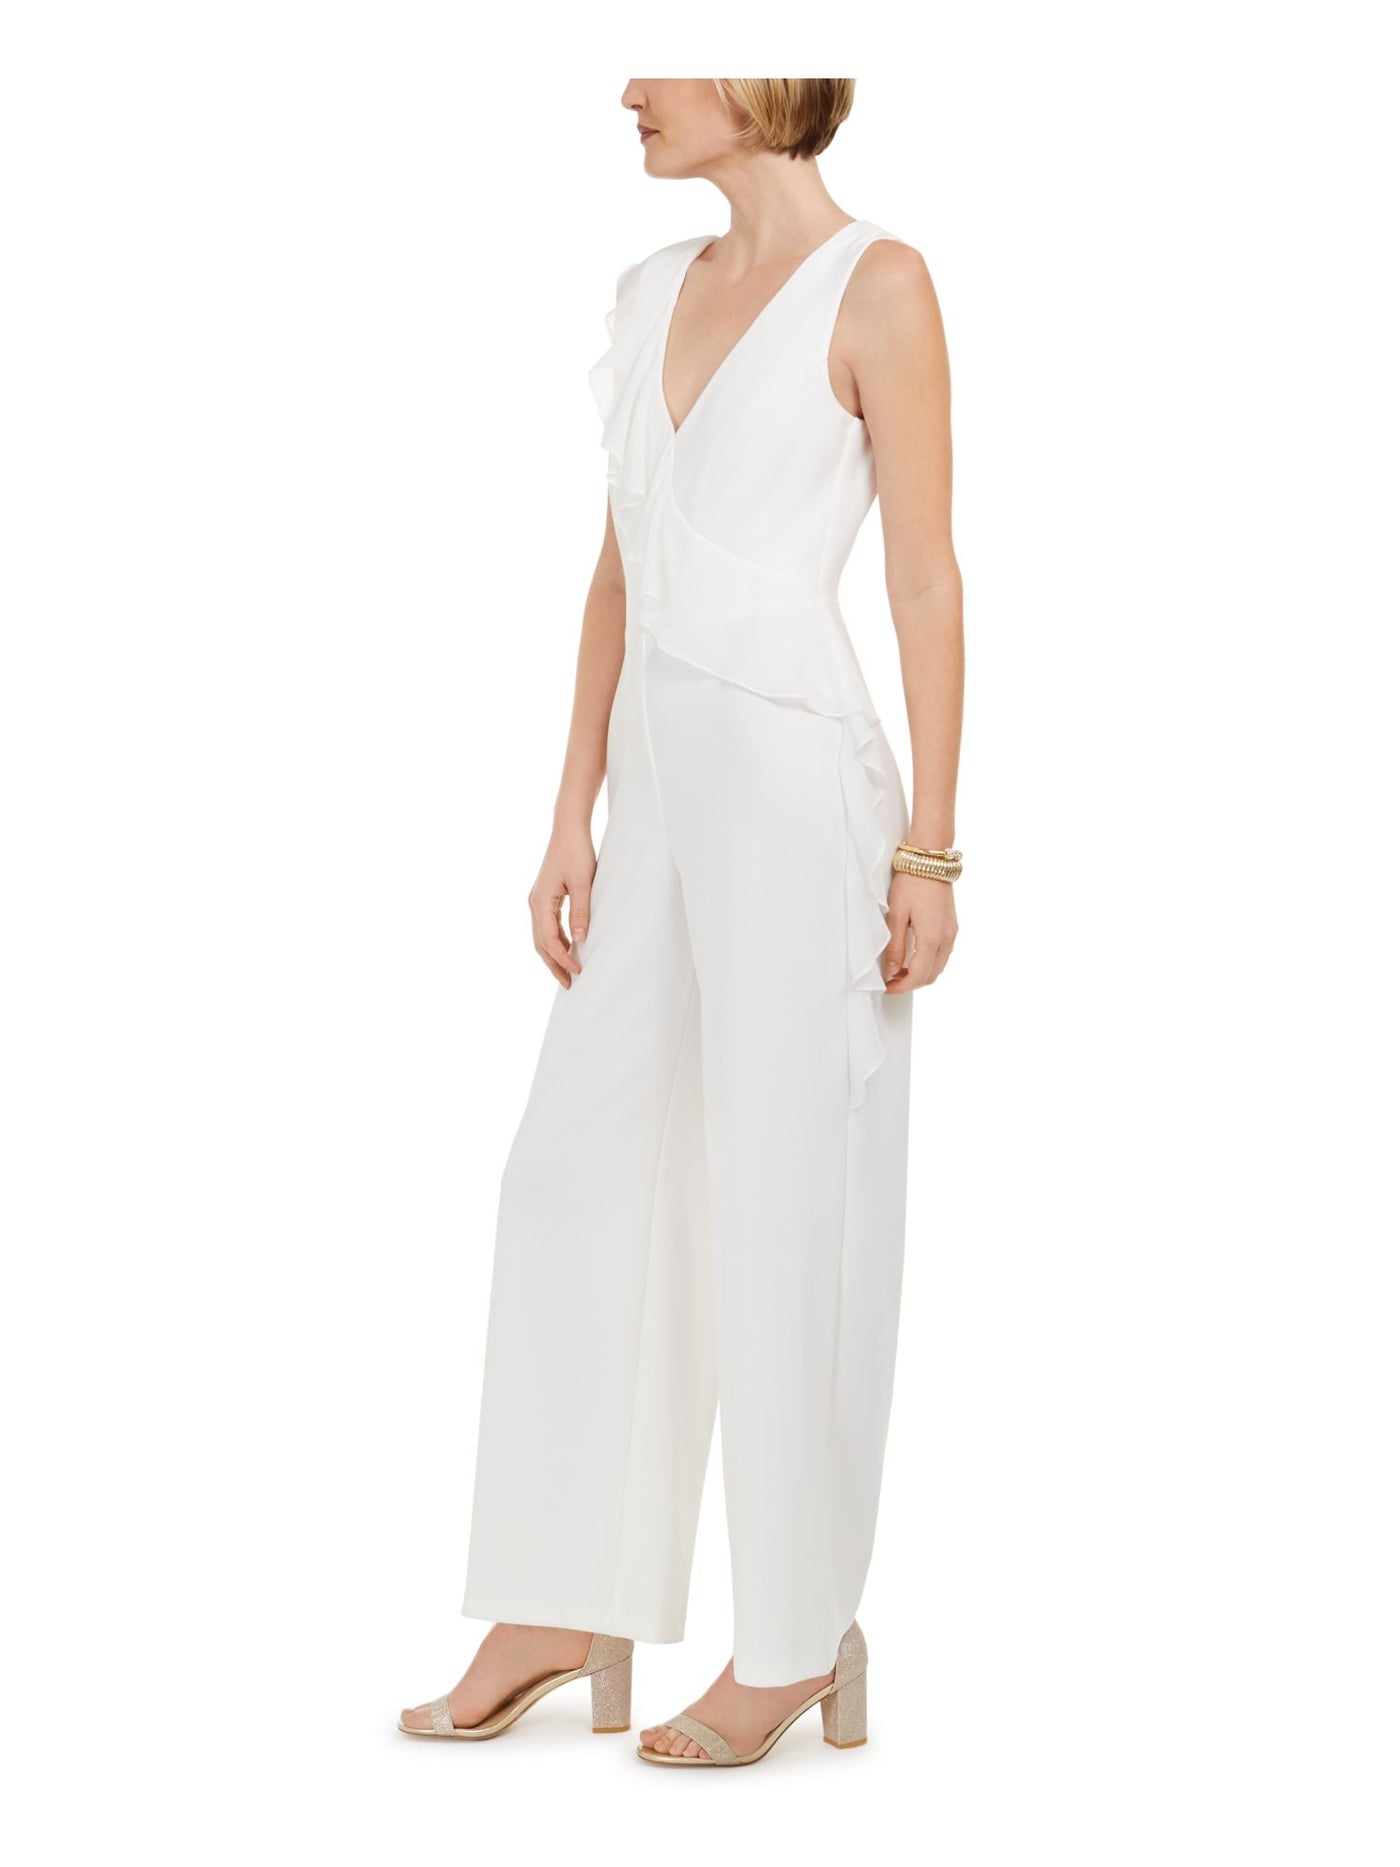 CONNECTED APPAREL Womens Ivory Sleeveless V Neck Evening Wide Leg Jumpsuit Petites 4P